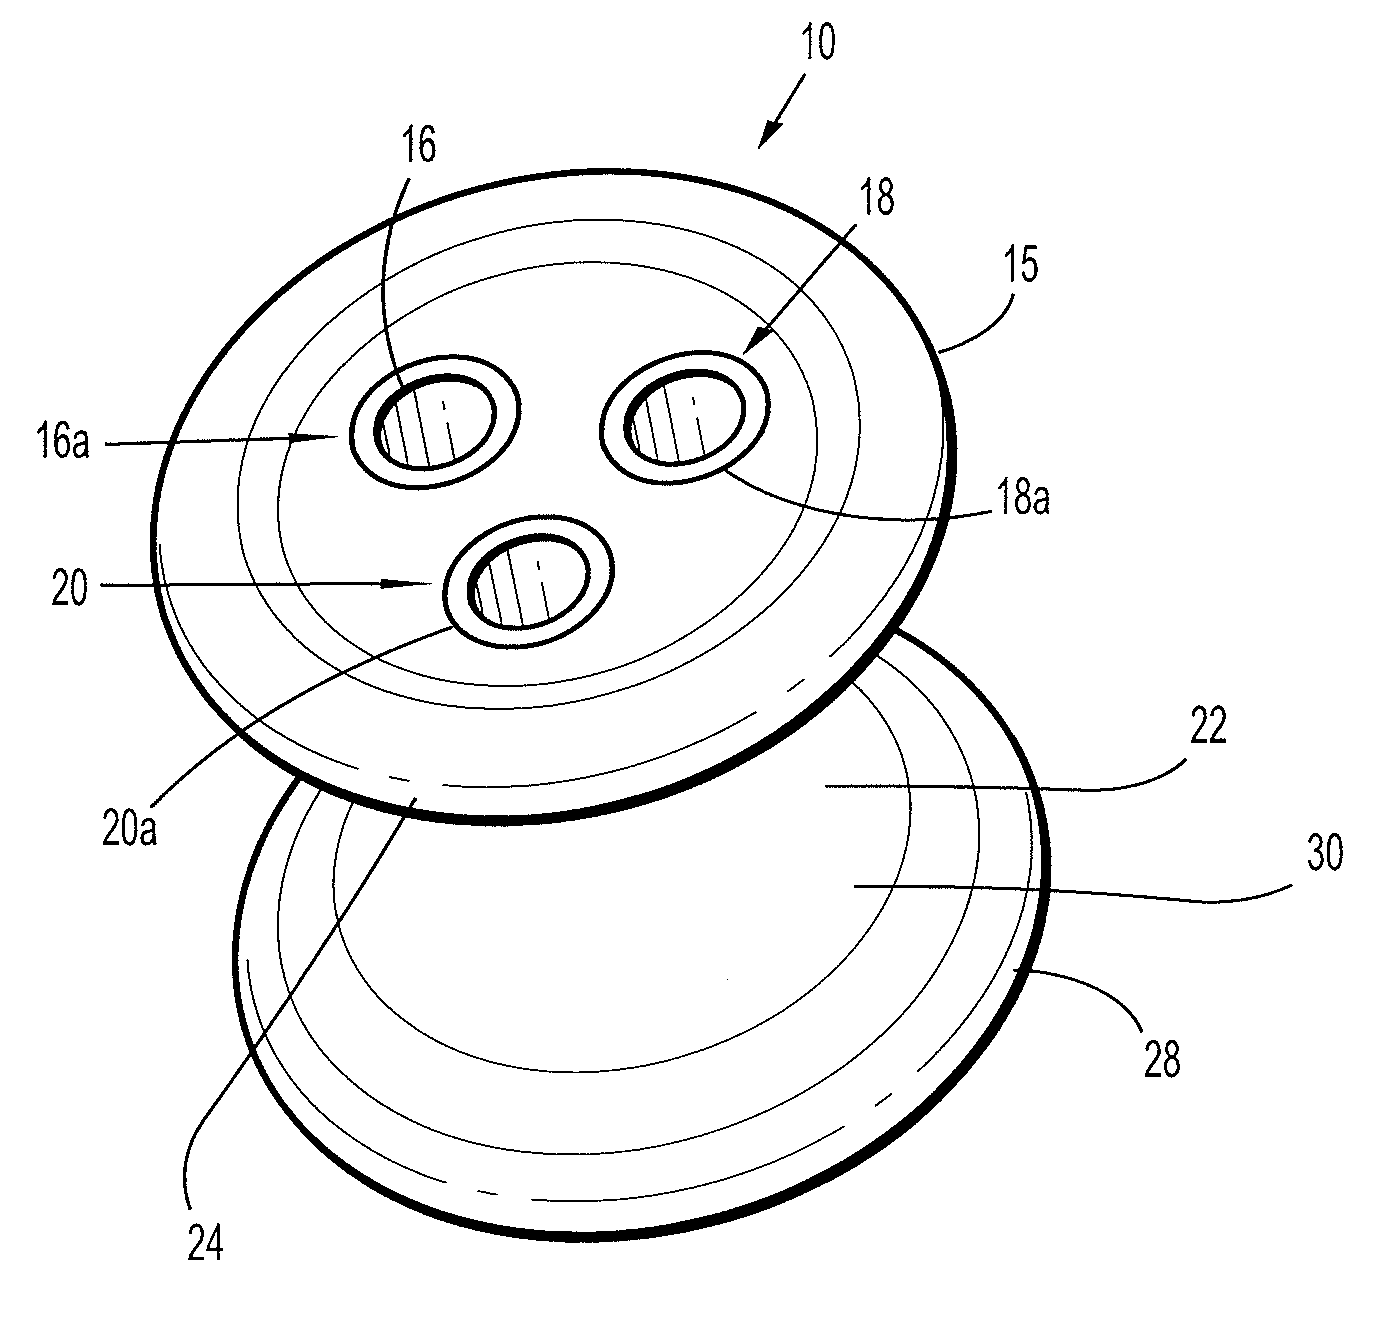 Flexible access assembly with reinforced lumen